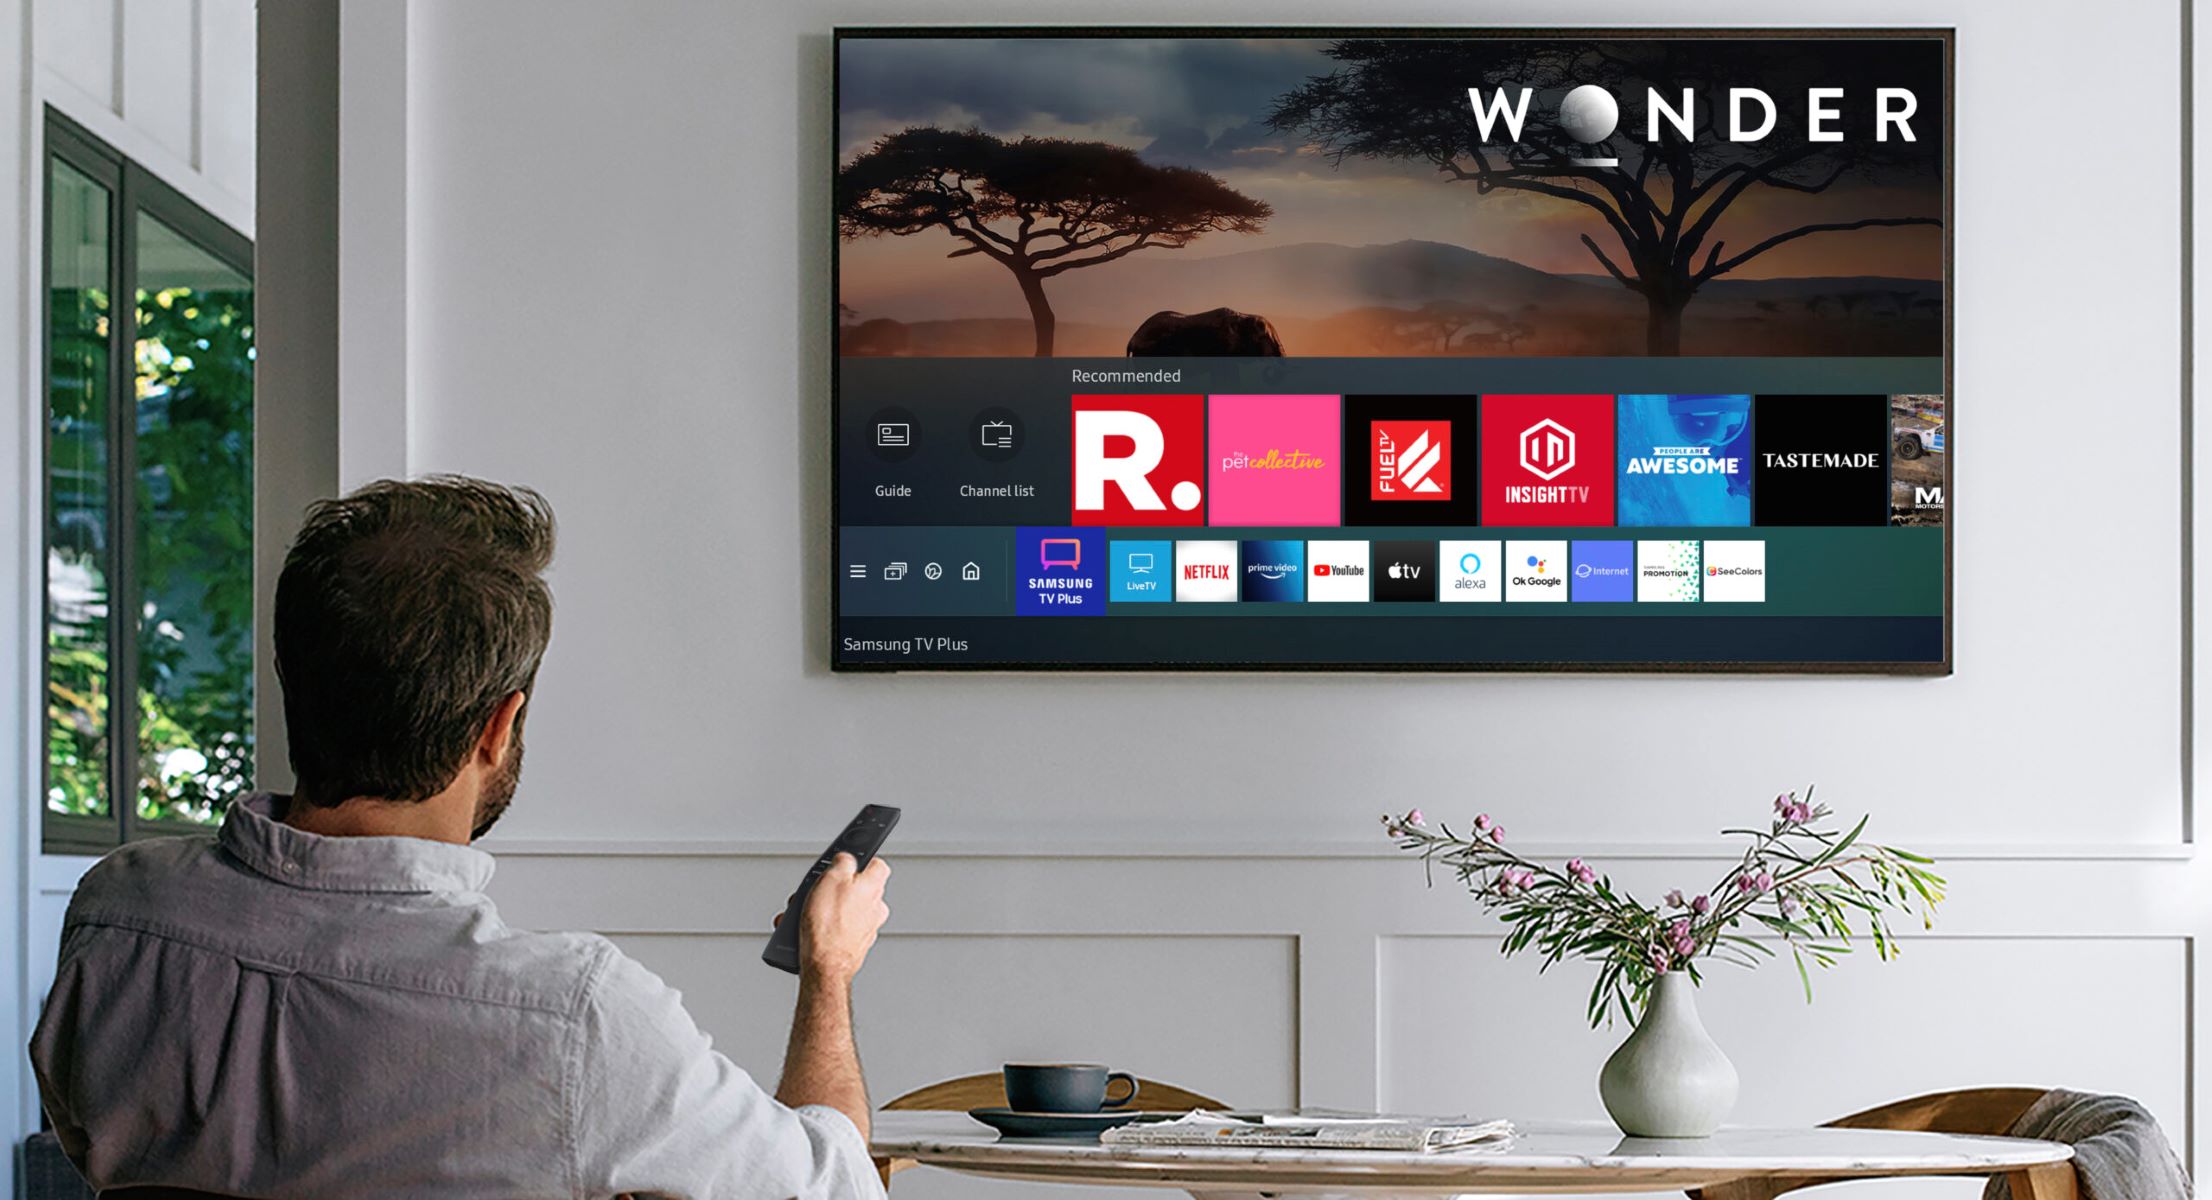 How To Watch News On Smart TV Without Cable